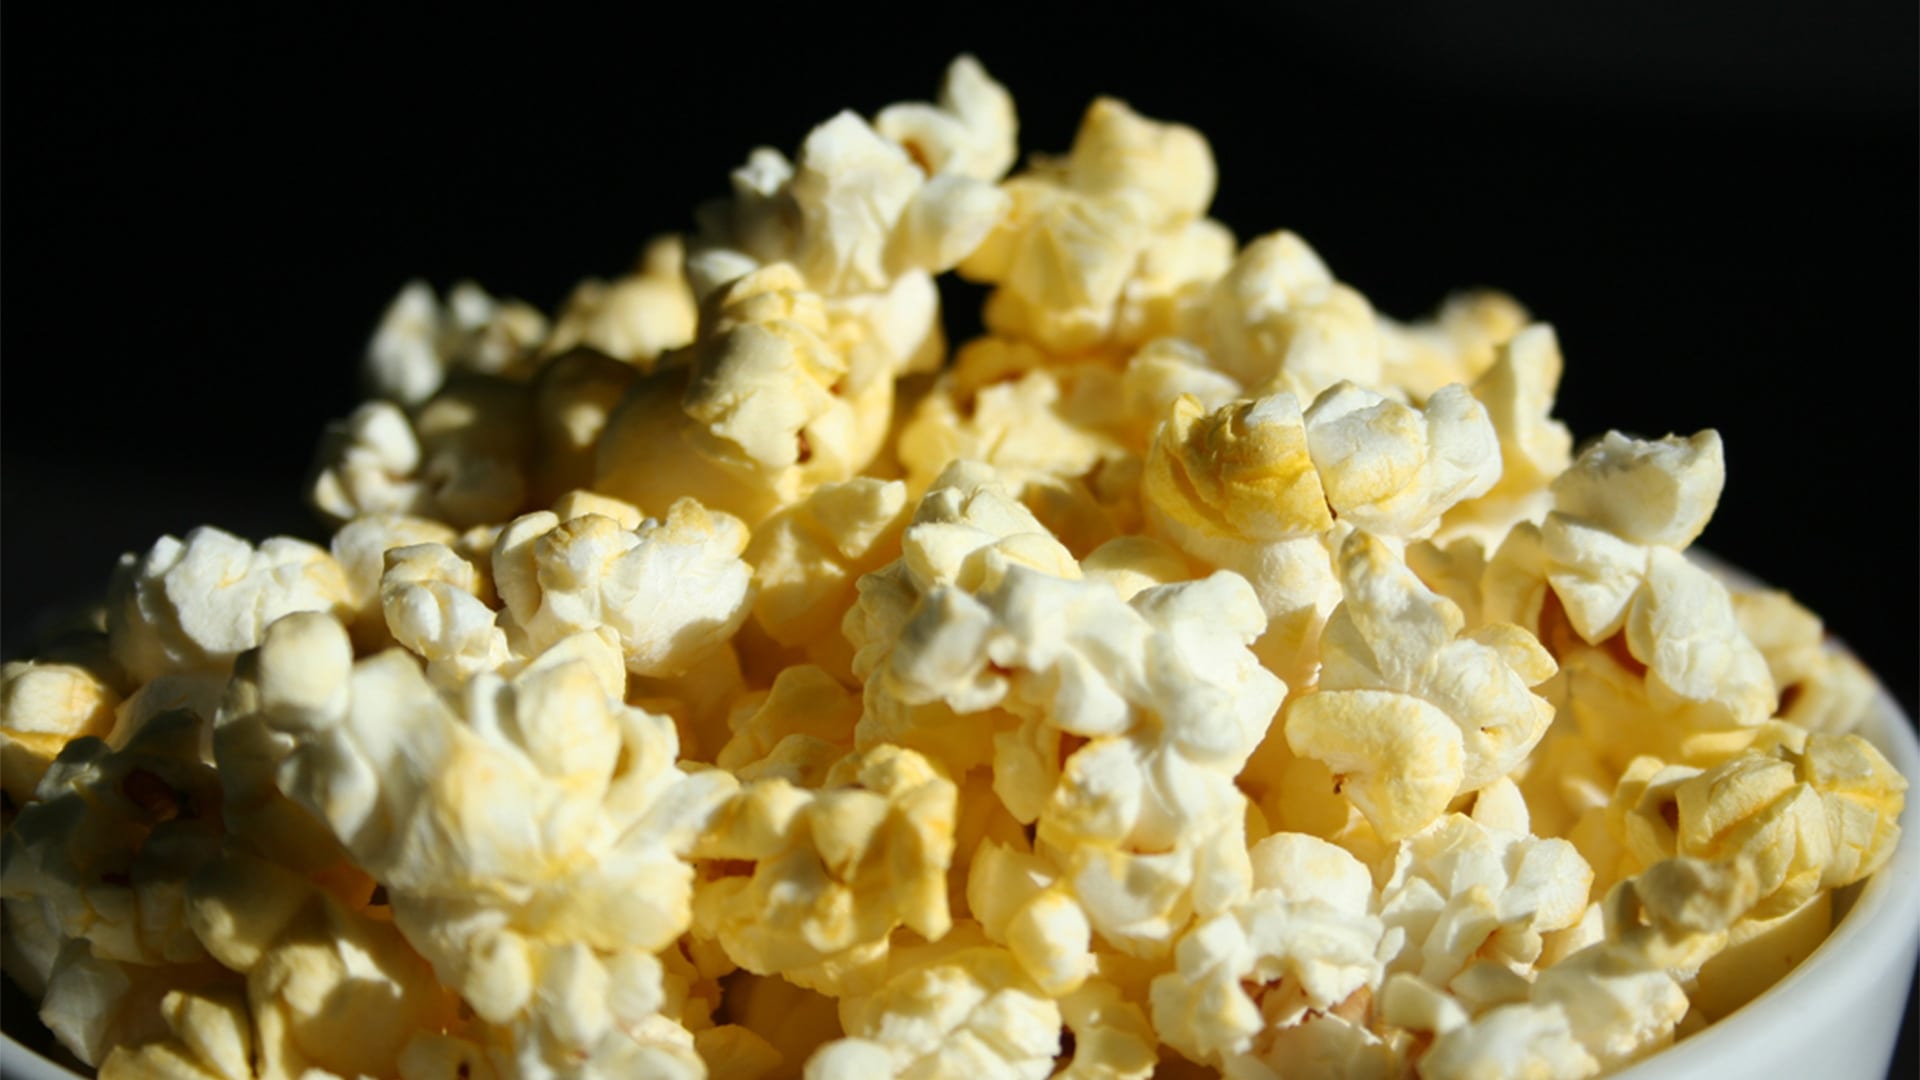 Popcorn has 22 different ways to translate into Spanish